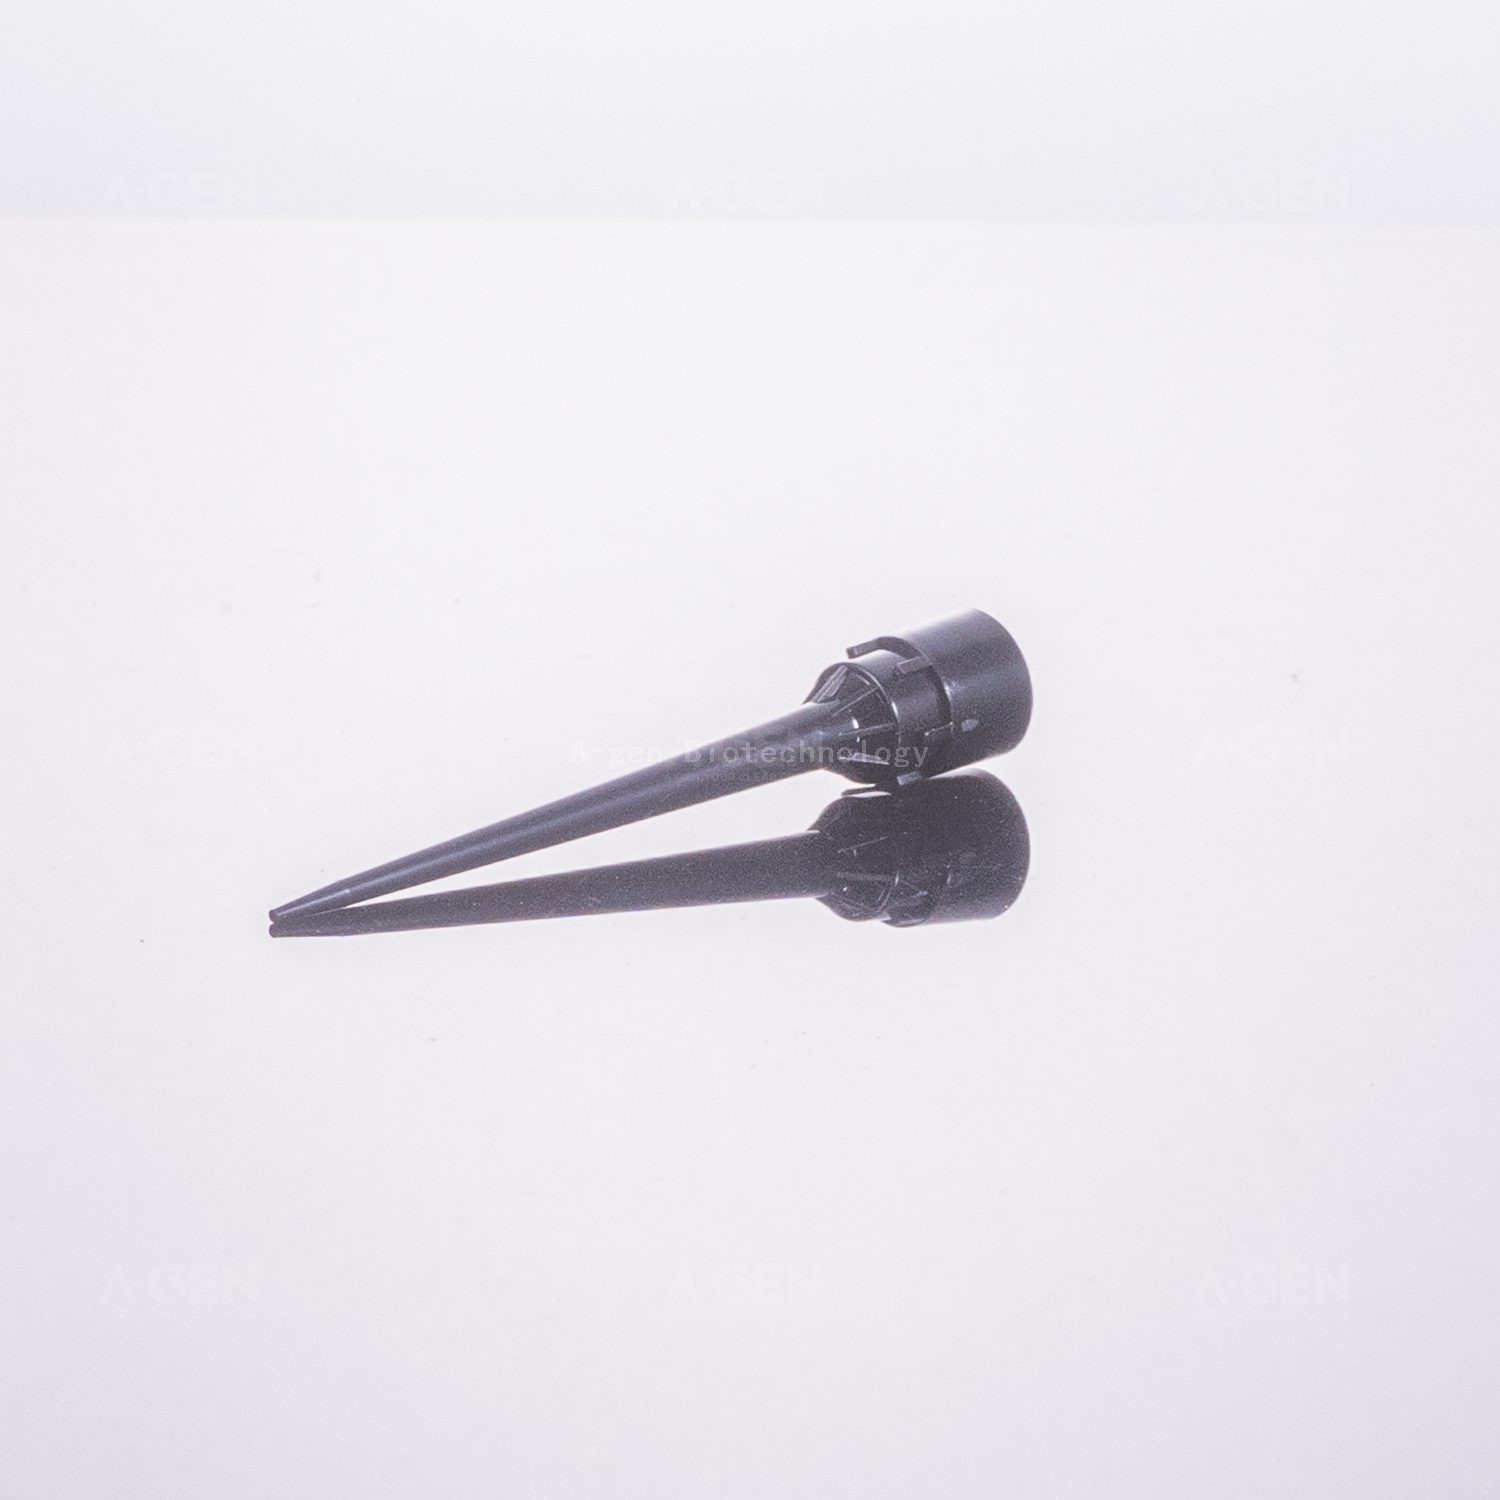 Hamilton Pipette Tip Conductive 50μL Black PP Pipette Tip (Racked,sterile) for Liquid Transfer Without Filter HT-50C-RSL low retention or not